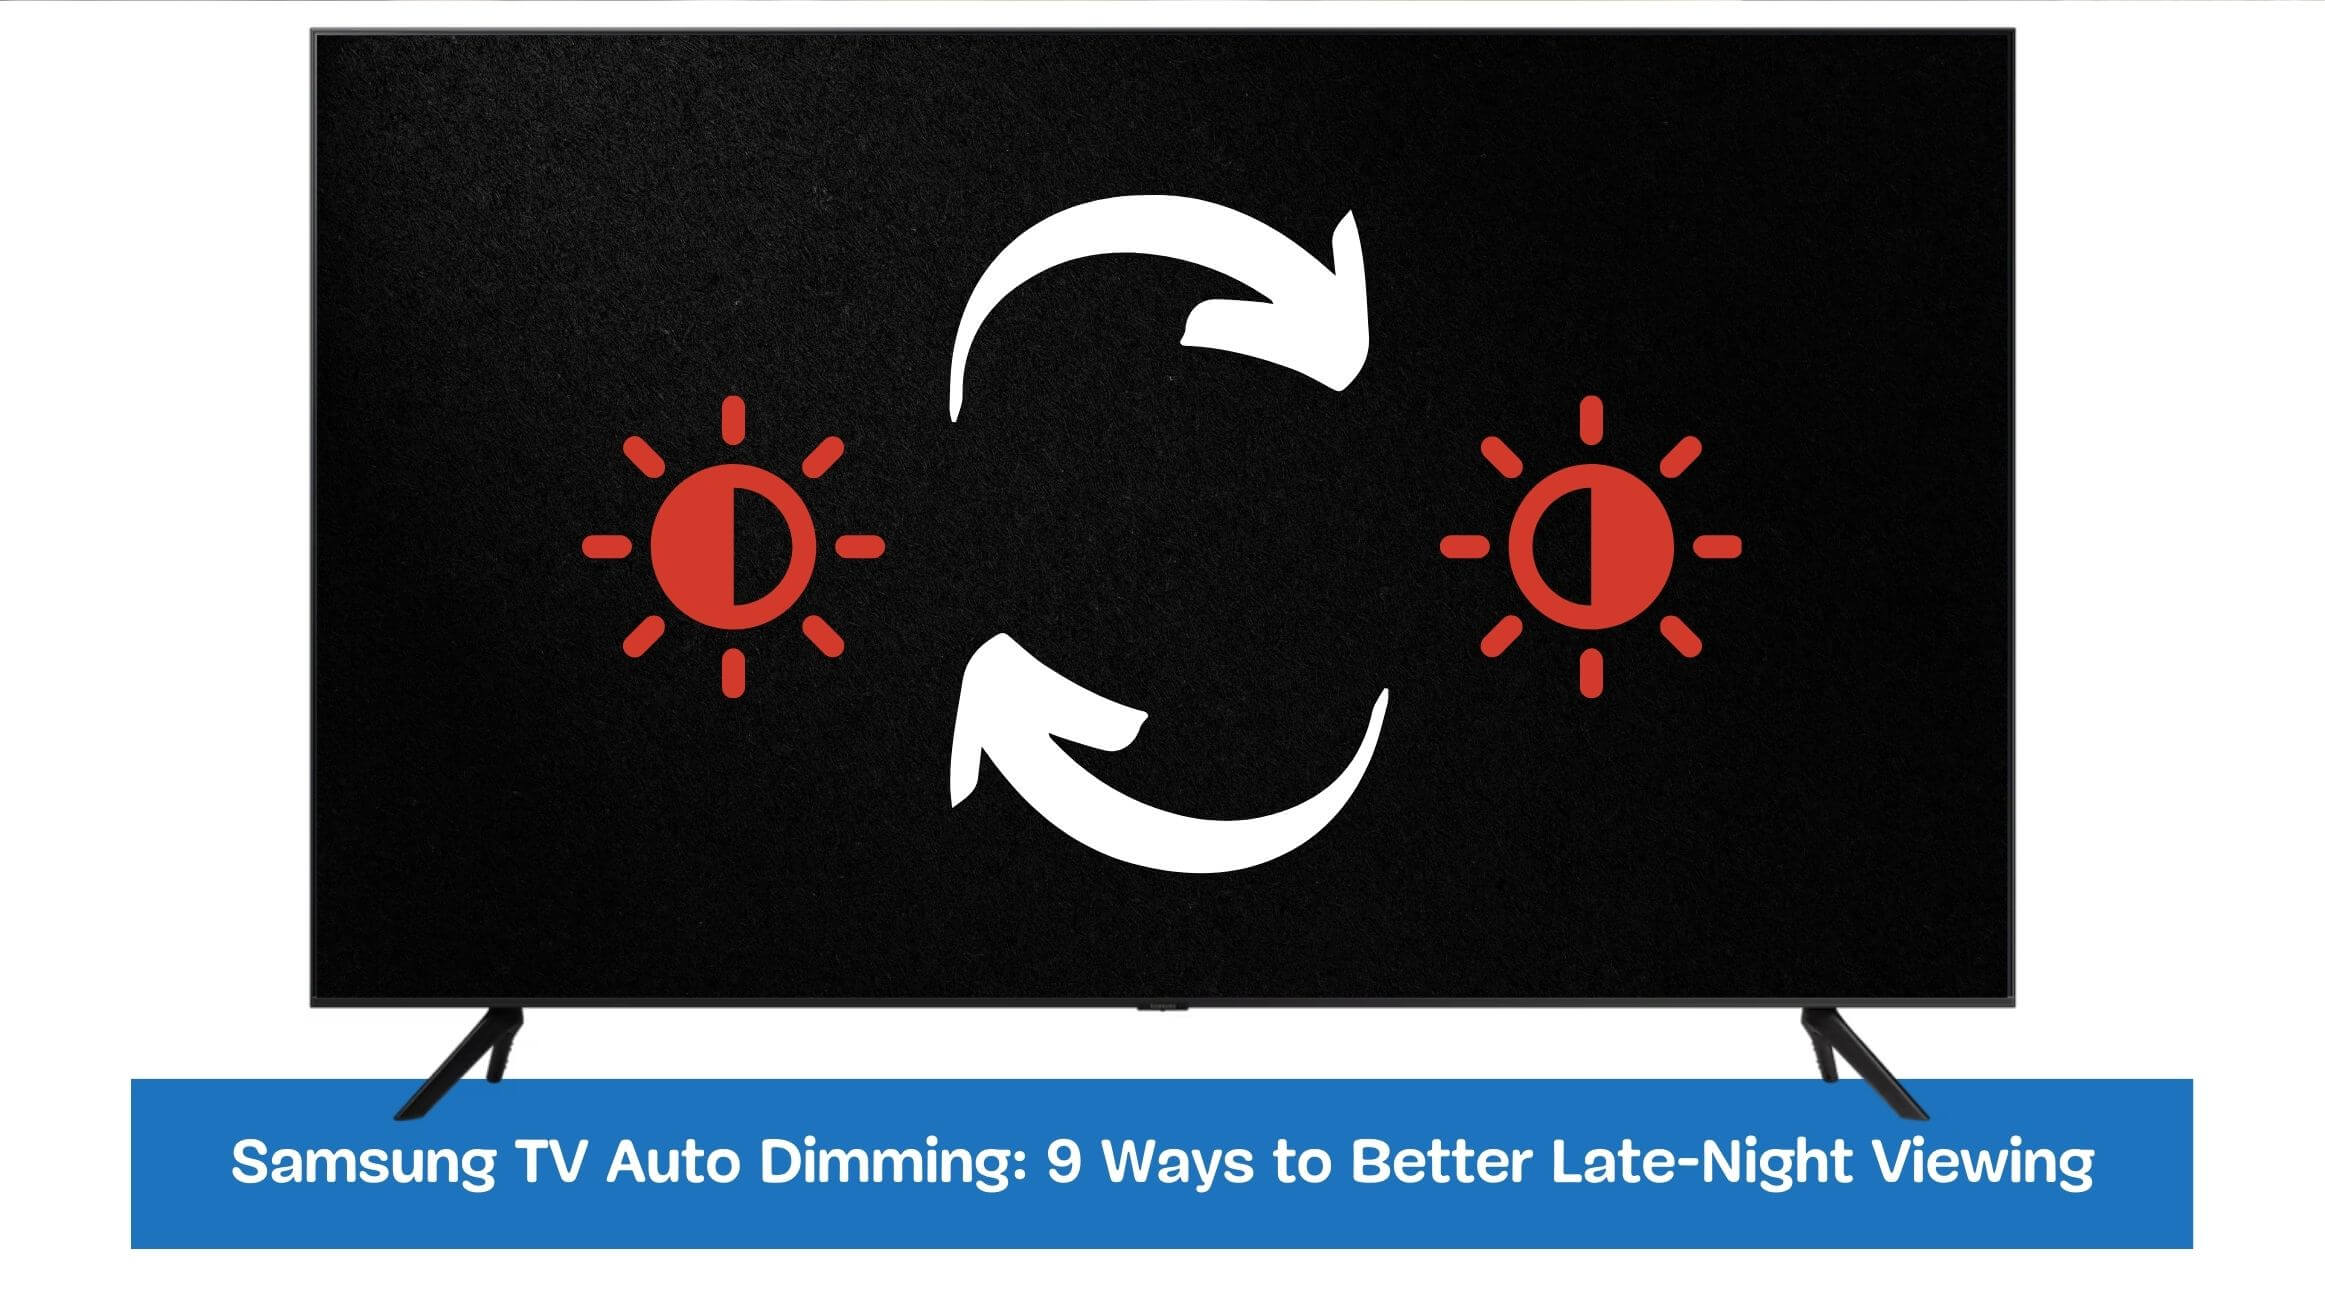 Samsung TV Auto Dimming: 9 Ways to Better Late-Night Viewing